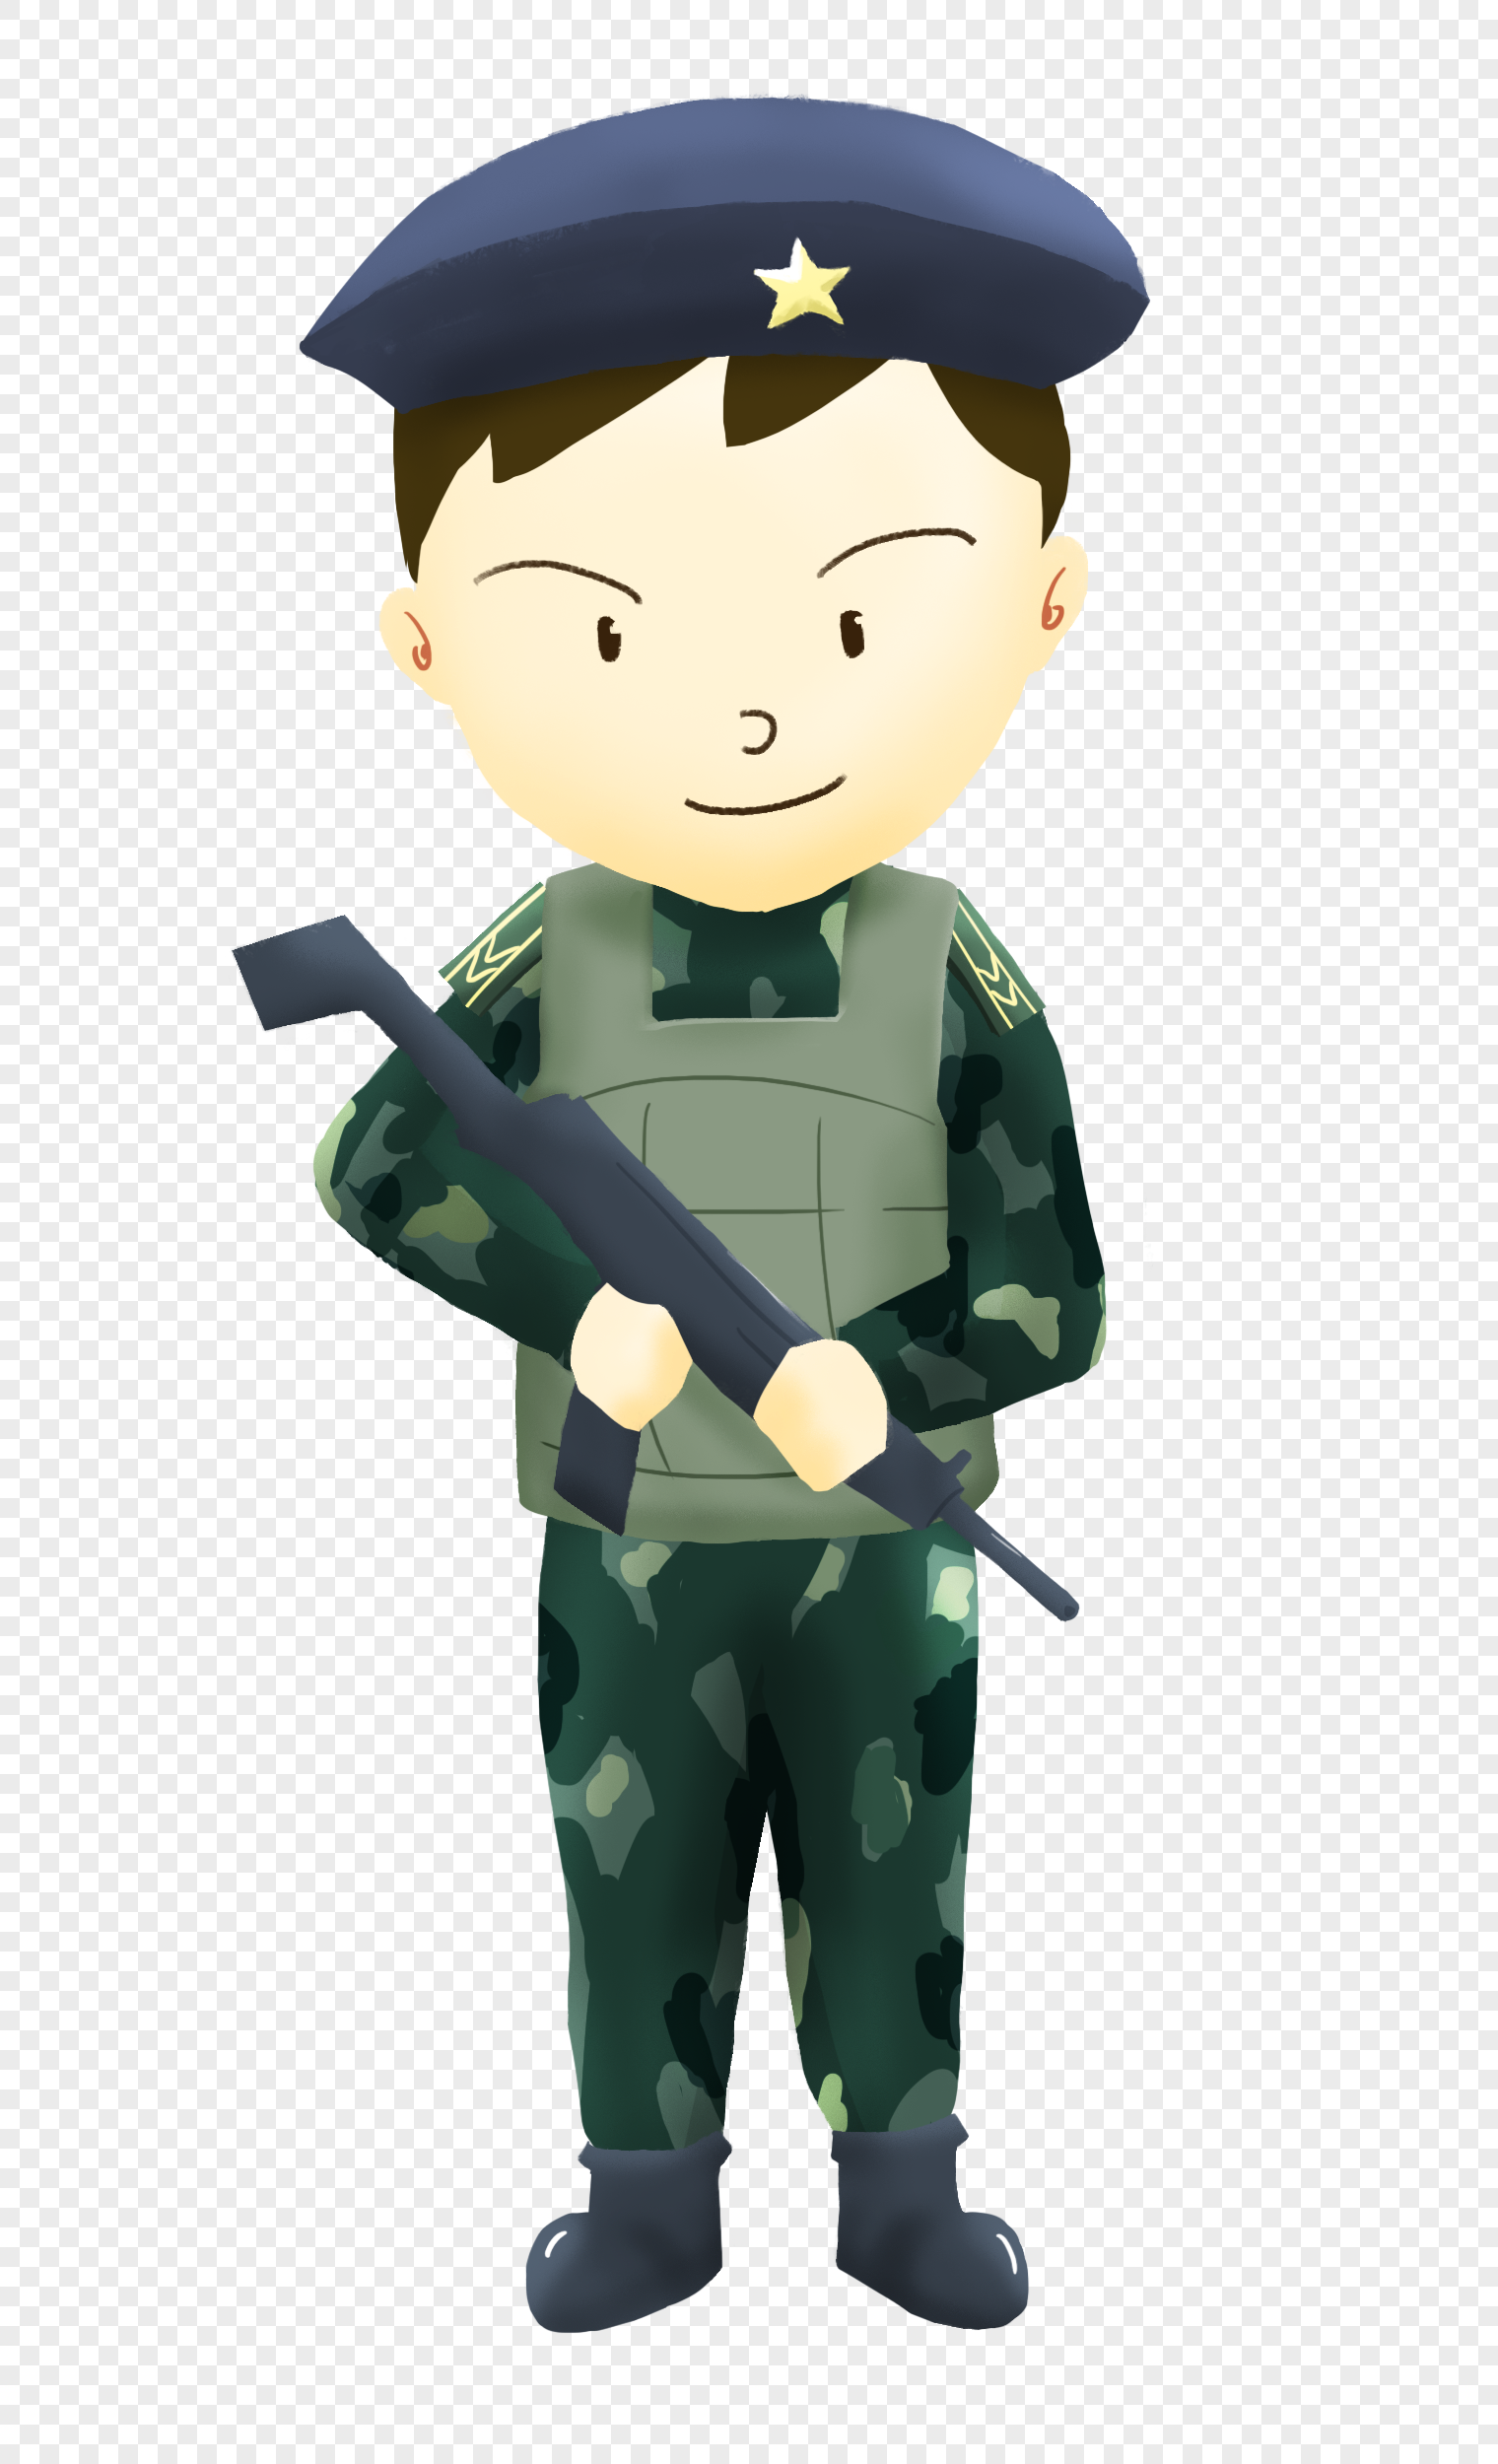 Hand Drawn Cartoon Soldier PNG Image Free Download And Clipart Image ...